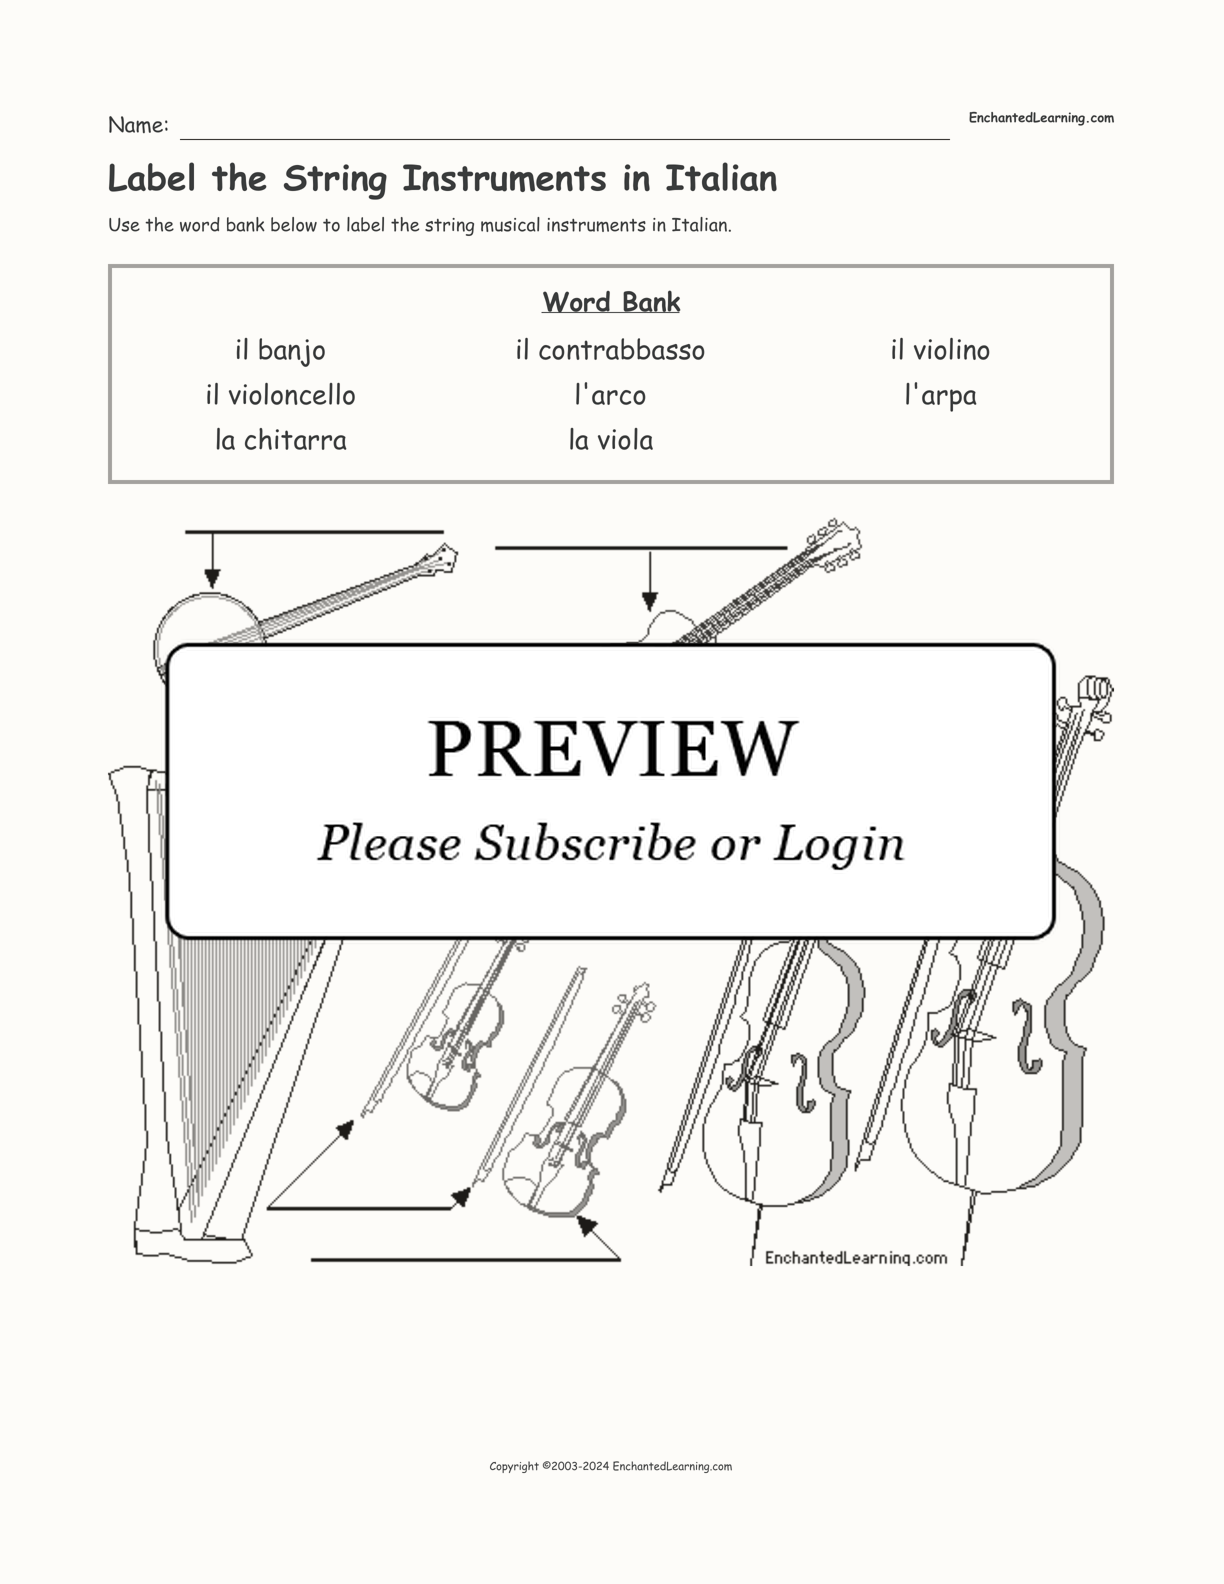 Label the String Instruments in Italian interactive worksheet page 1